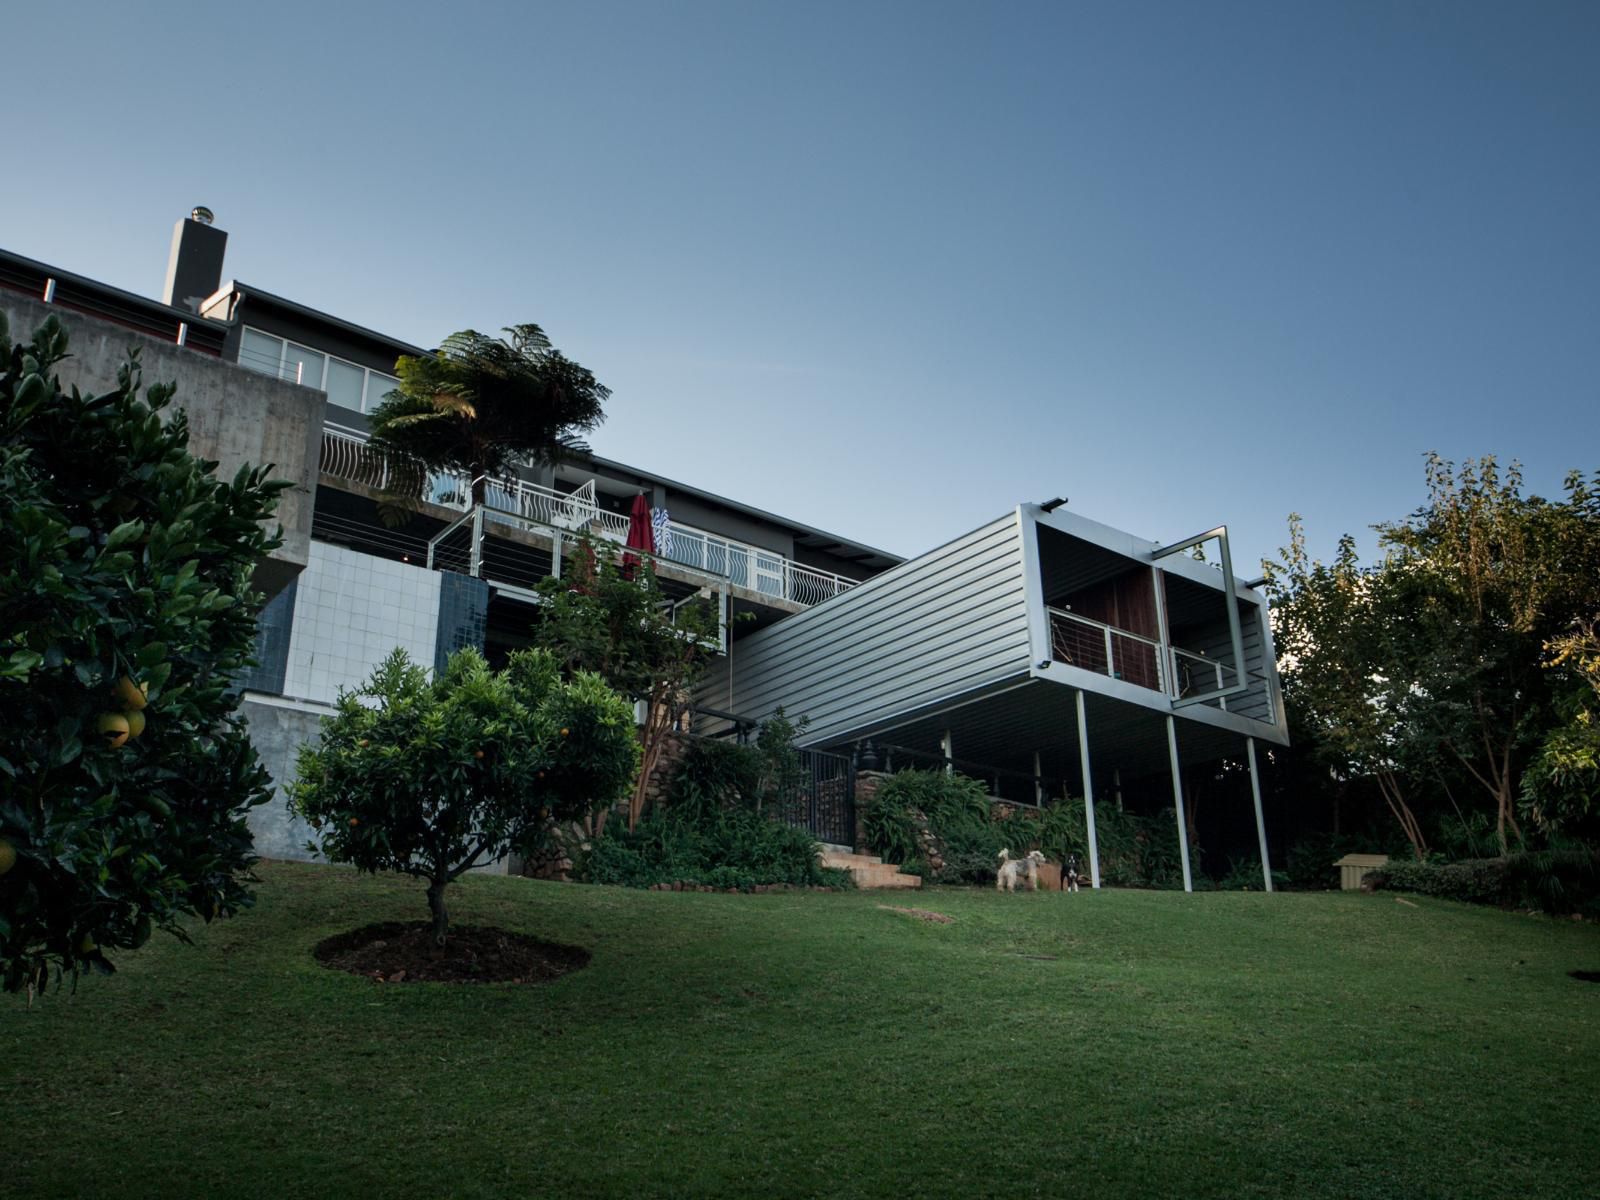 Mister C Schoemansville Hartbeespoort North West Province South Africa Building, Architecture, House